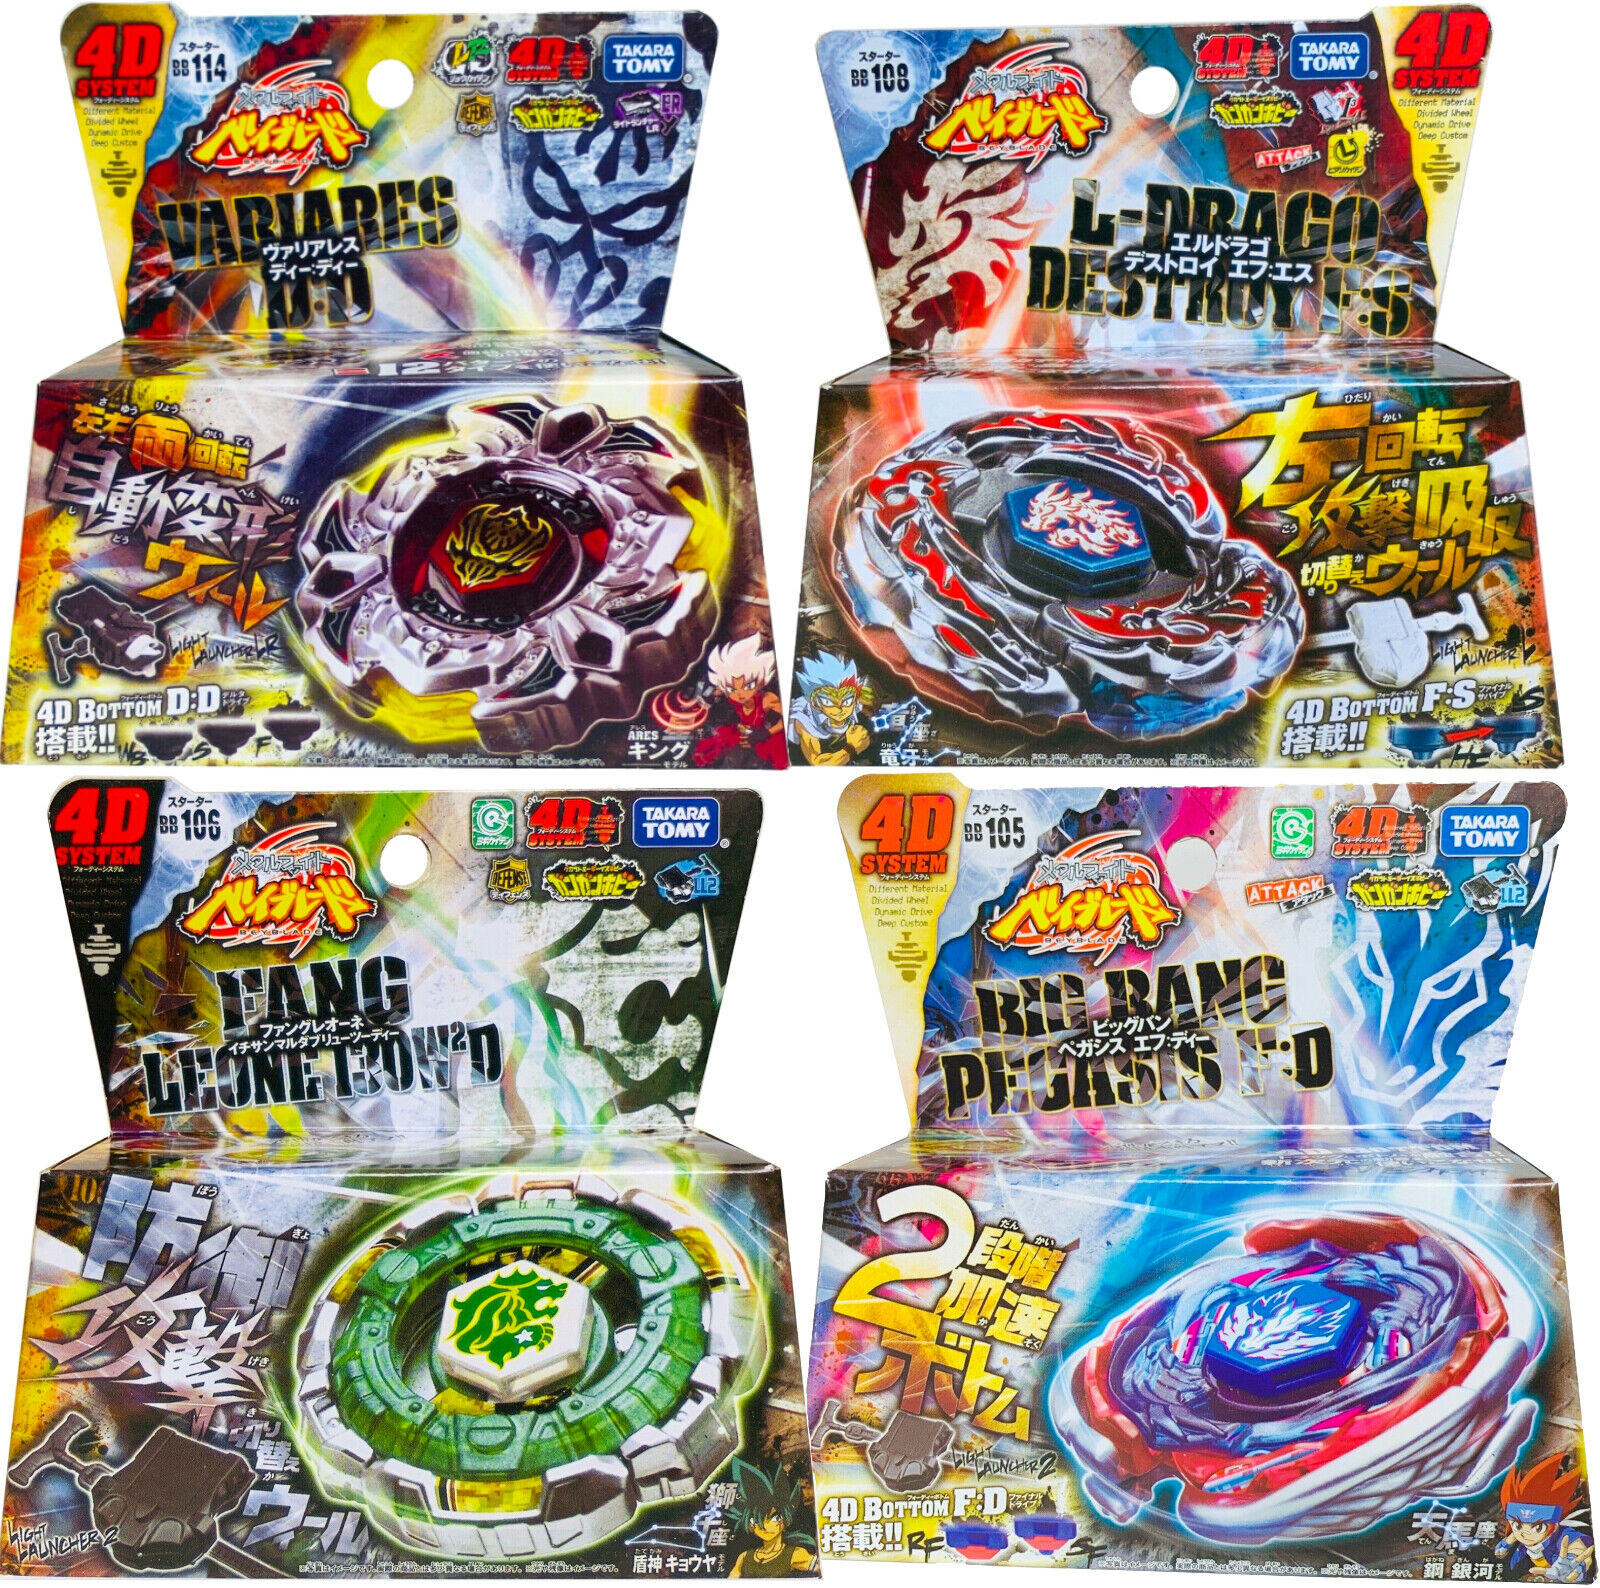 Beyblade Lot of 4 Metal Fusion Set - 4 Takara Tomy Beyblades with Launchers Takara Tomy Does Not Apply